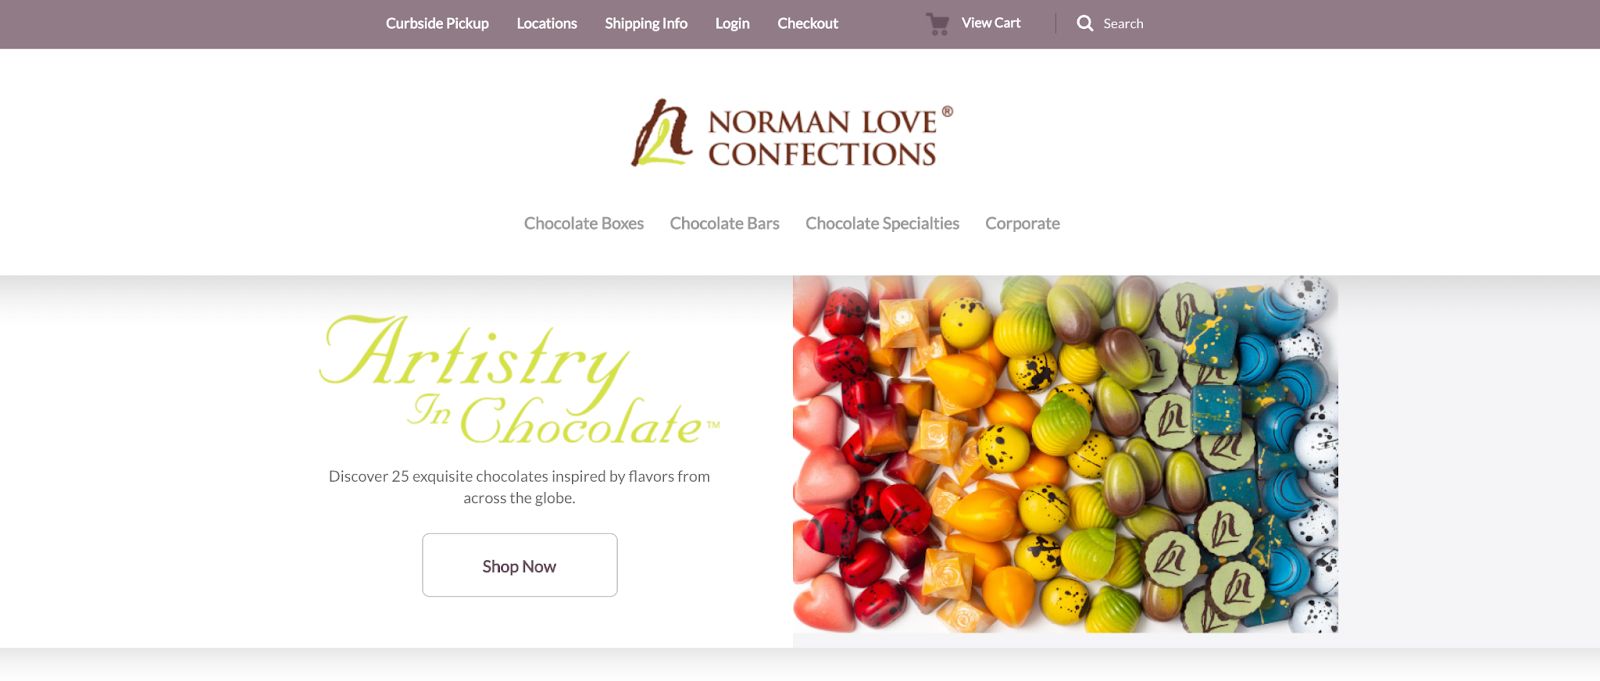 Norman Loves Confections homepage